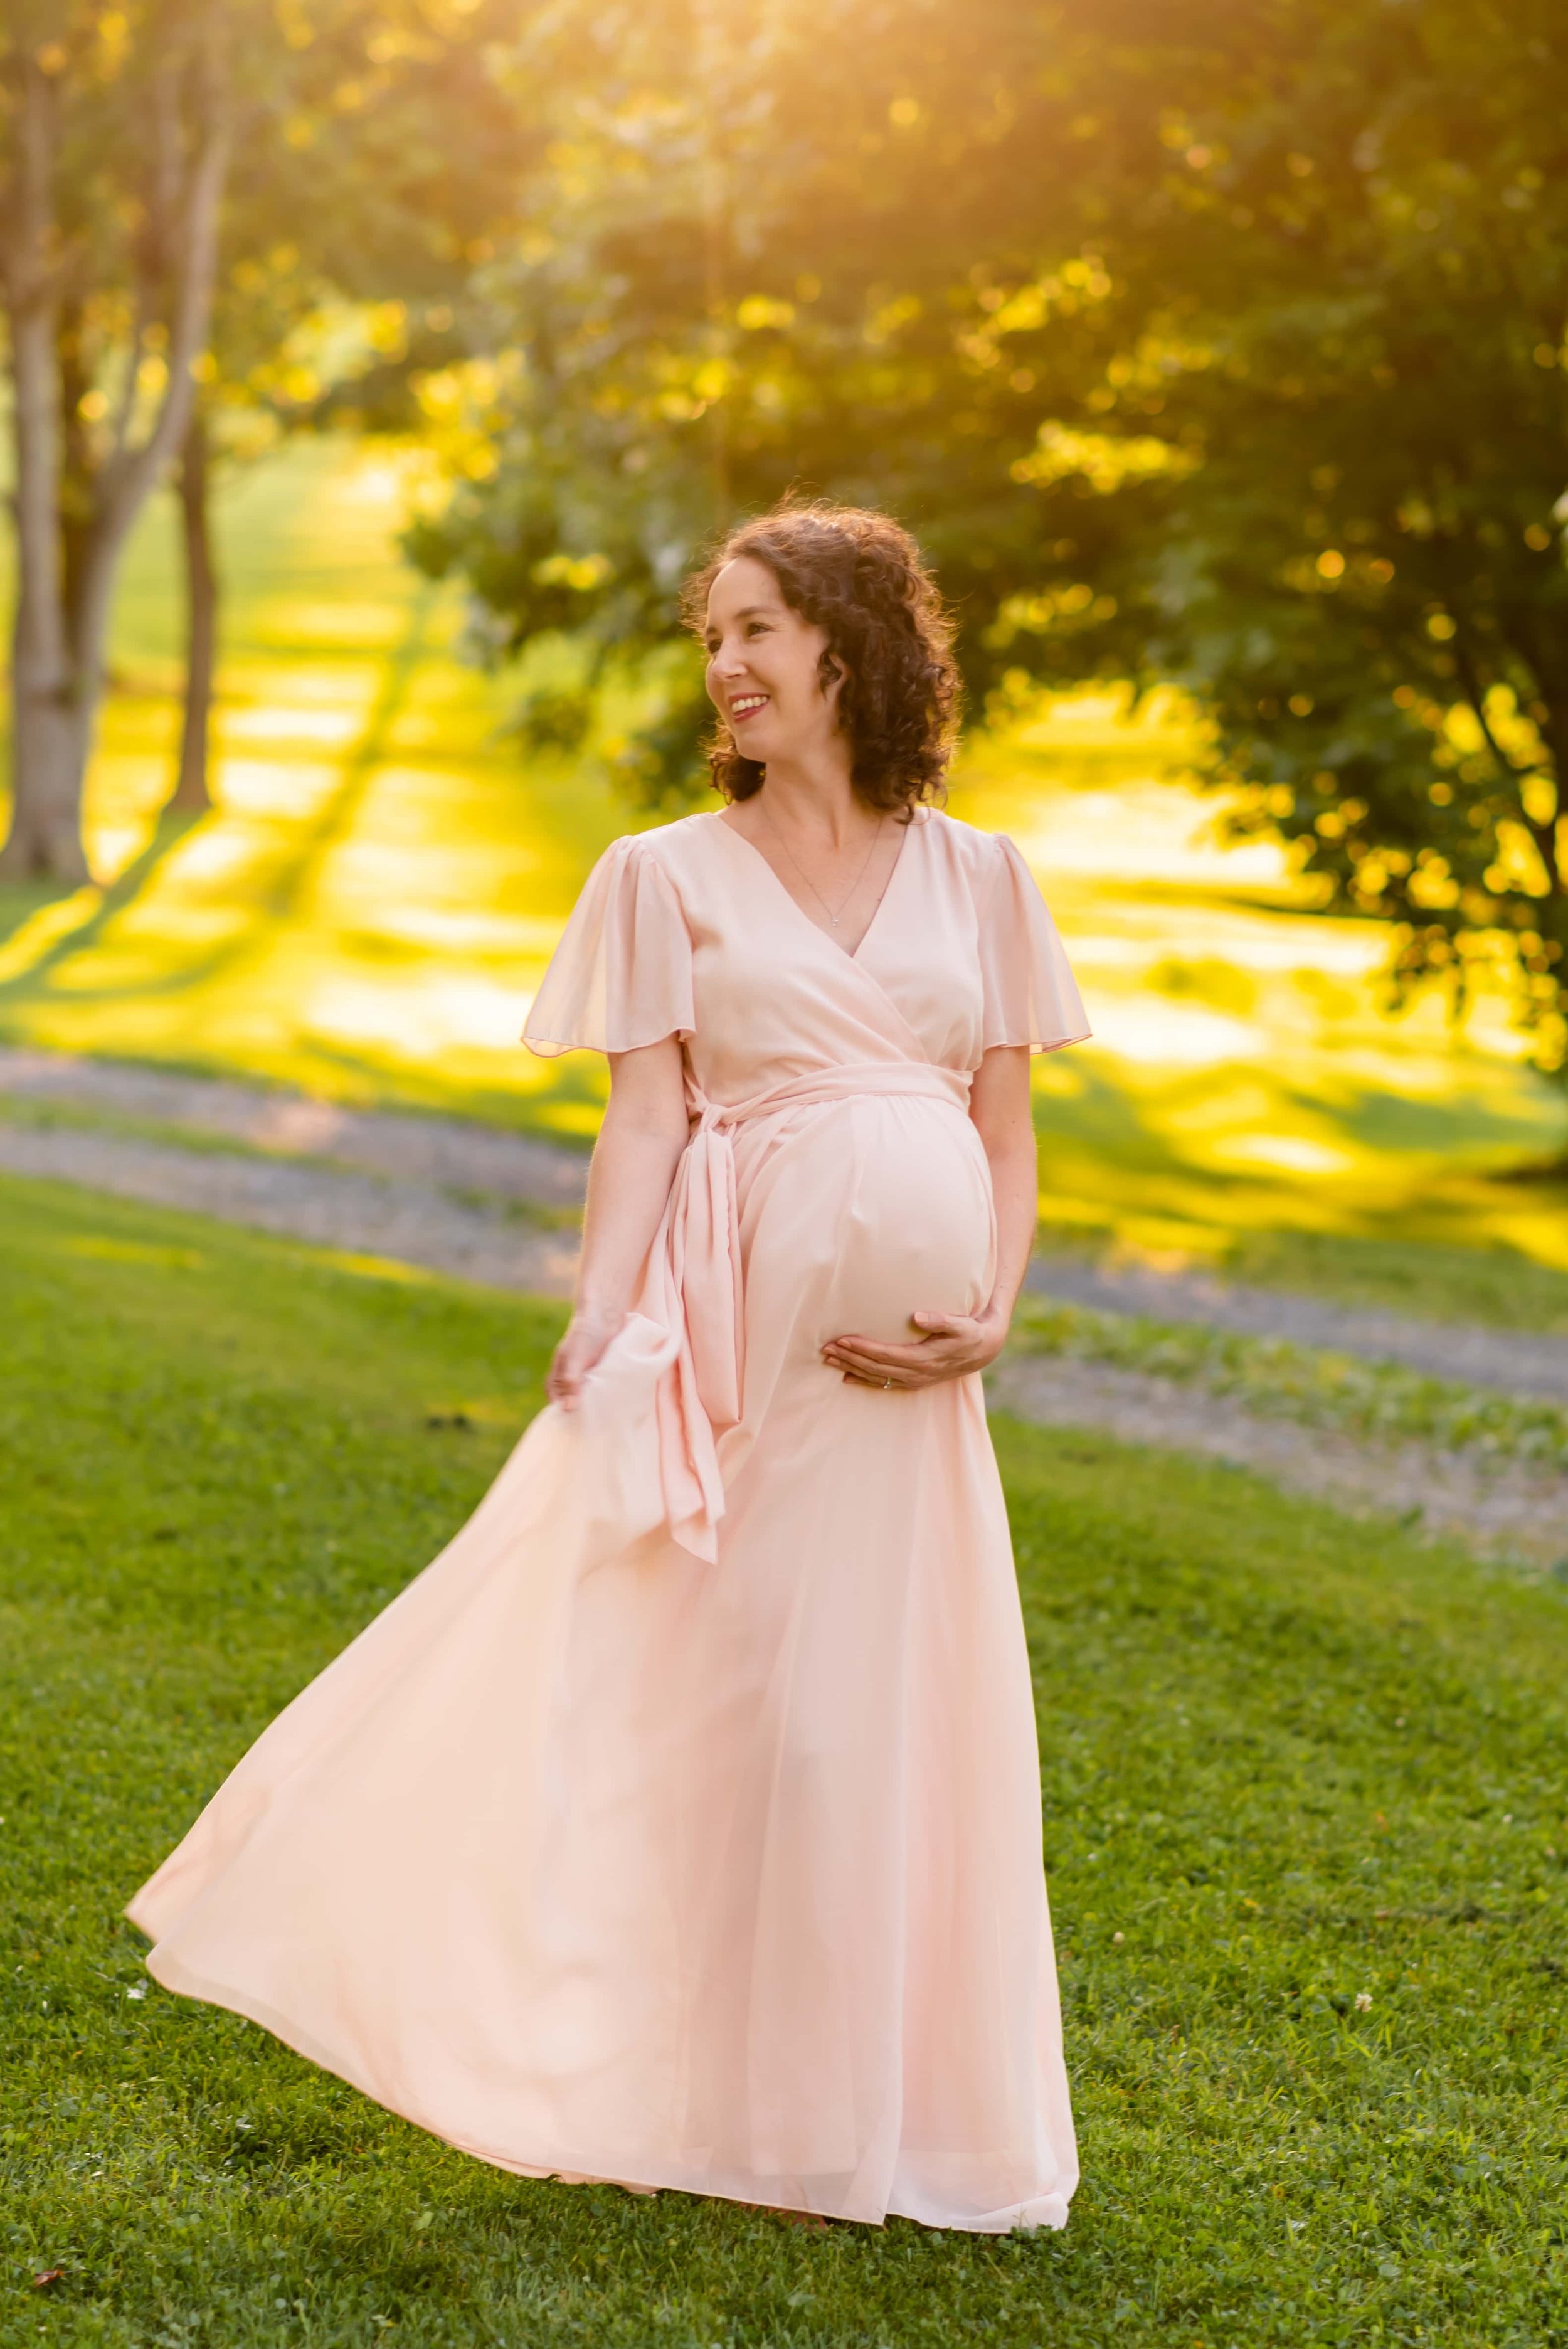 Maryland Maternity Photo of Woman Holding Her Belly and Playing with Her Dress